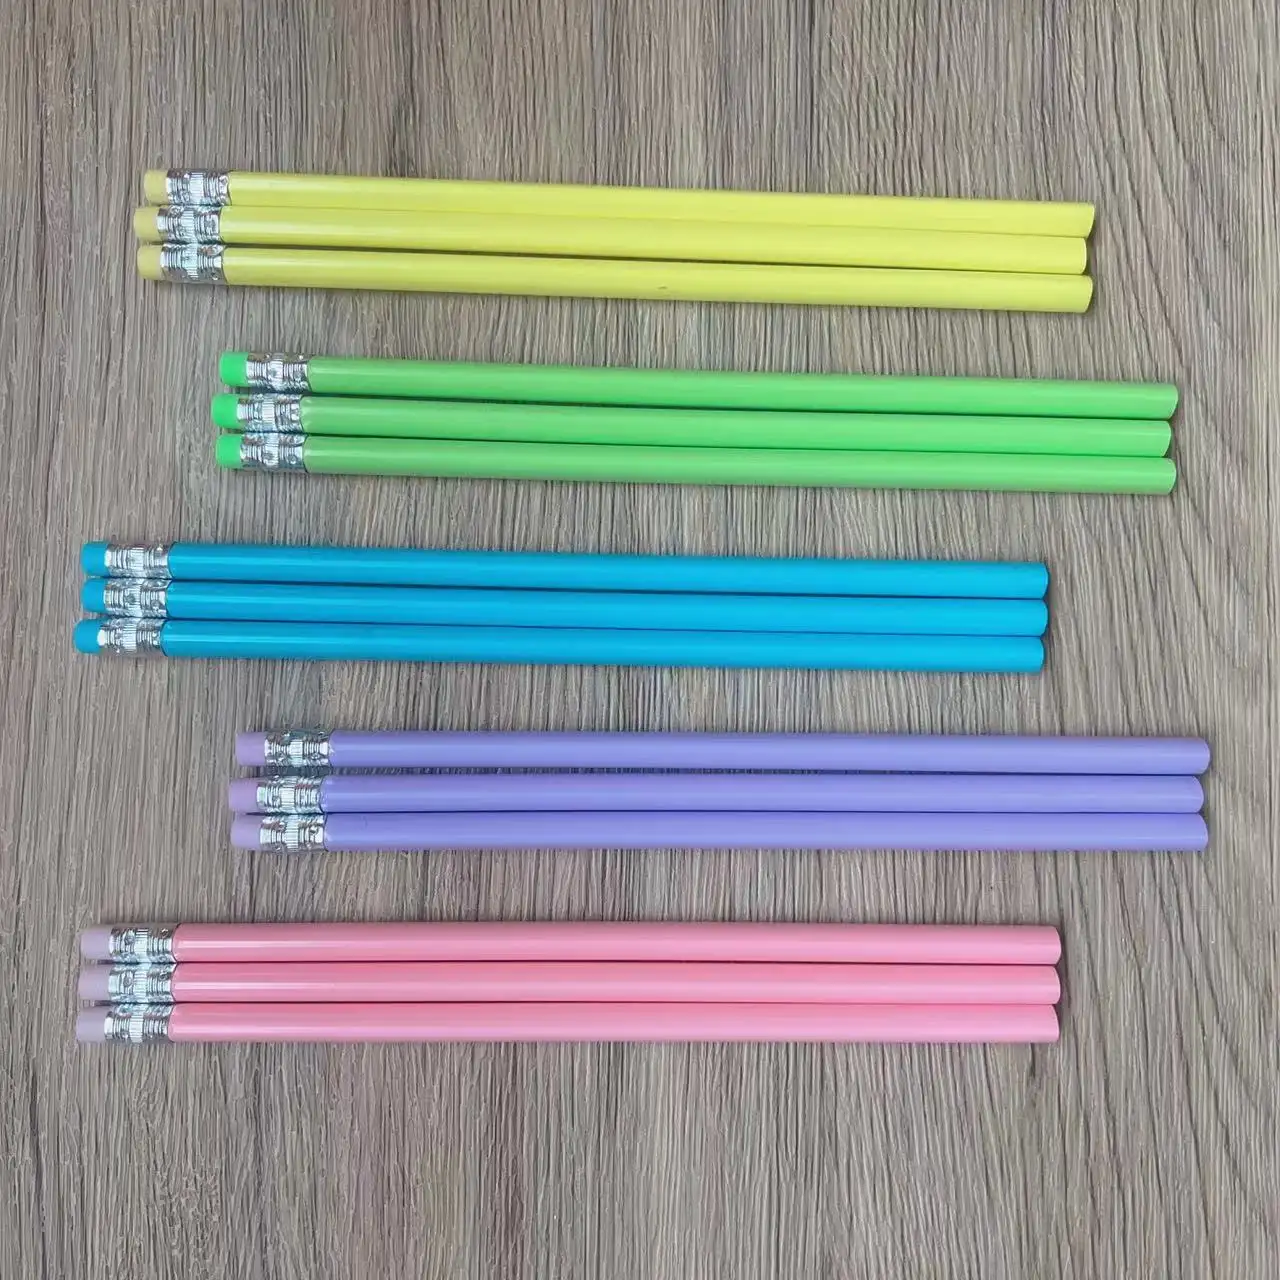 Pencil Wholesale Macaron Triangle Rod Sketch of Bright Lime with Rubber Head Painting Pen Learning Stationery HB